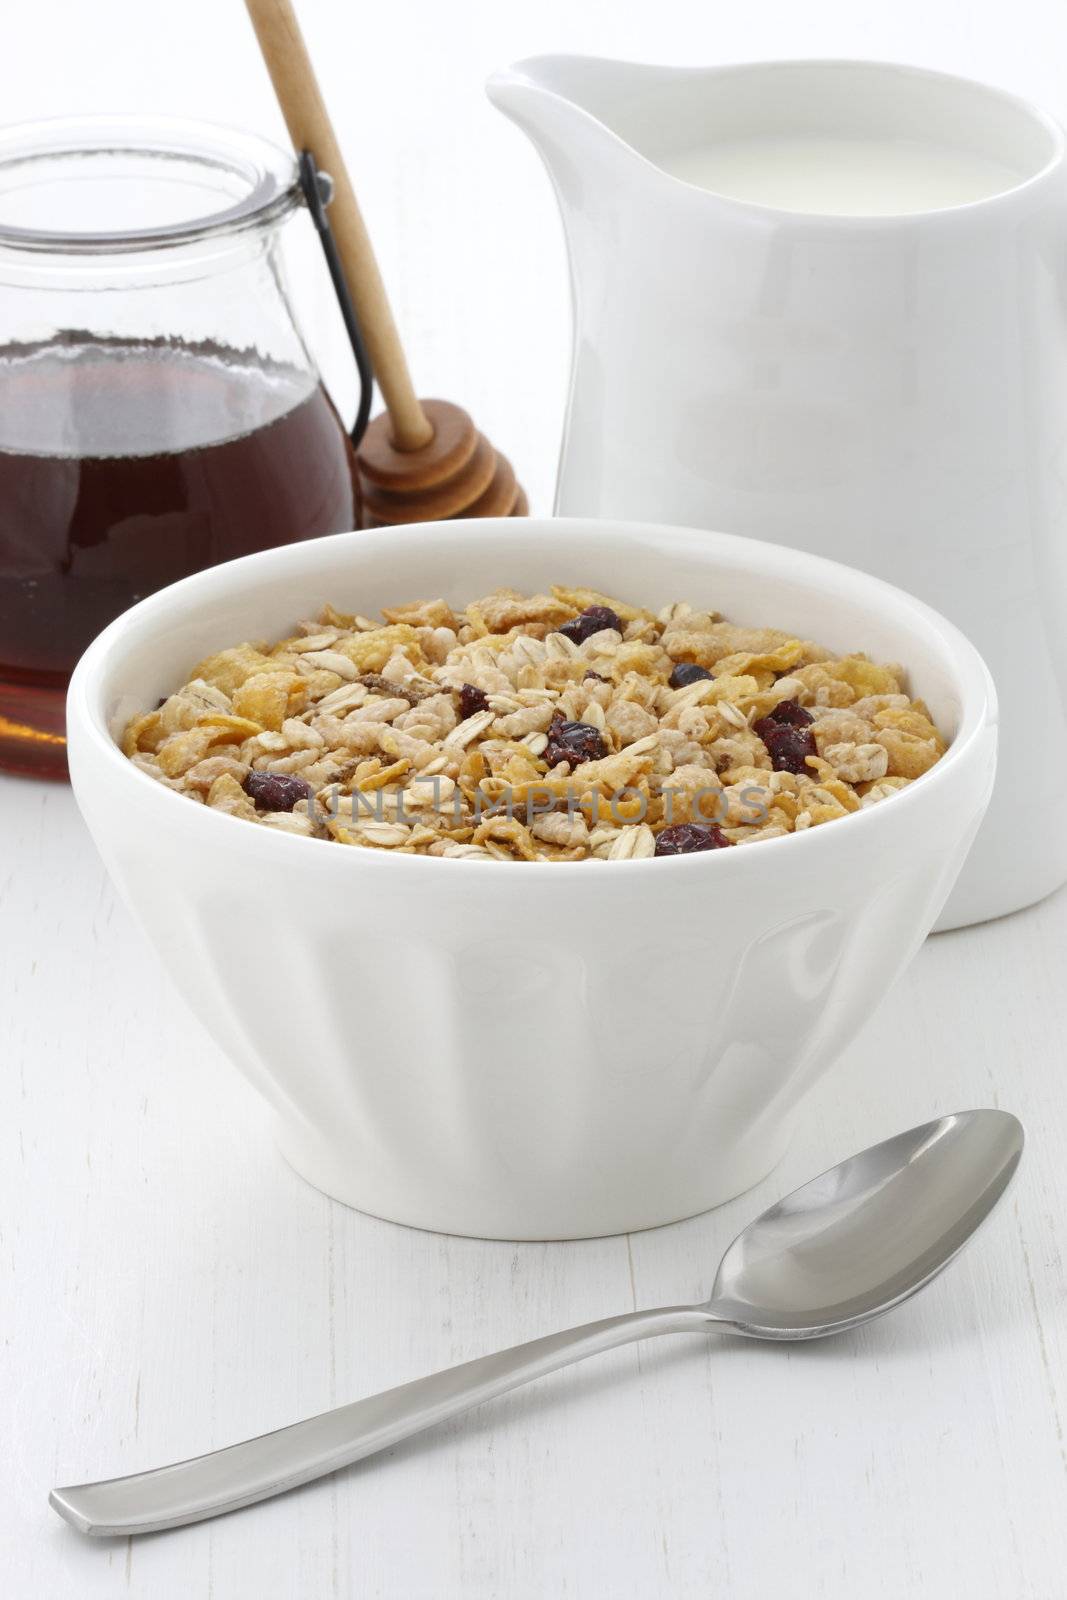 Delicious and healthy muesli cereal  by tacar